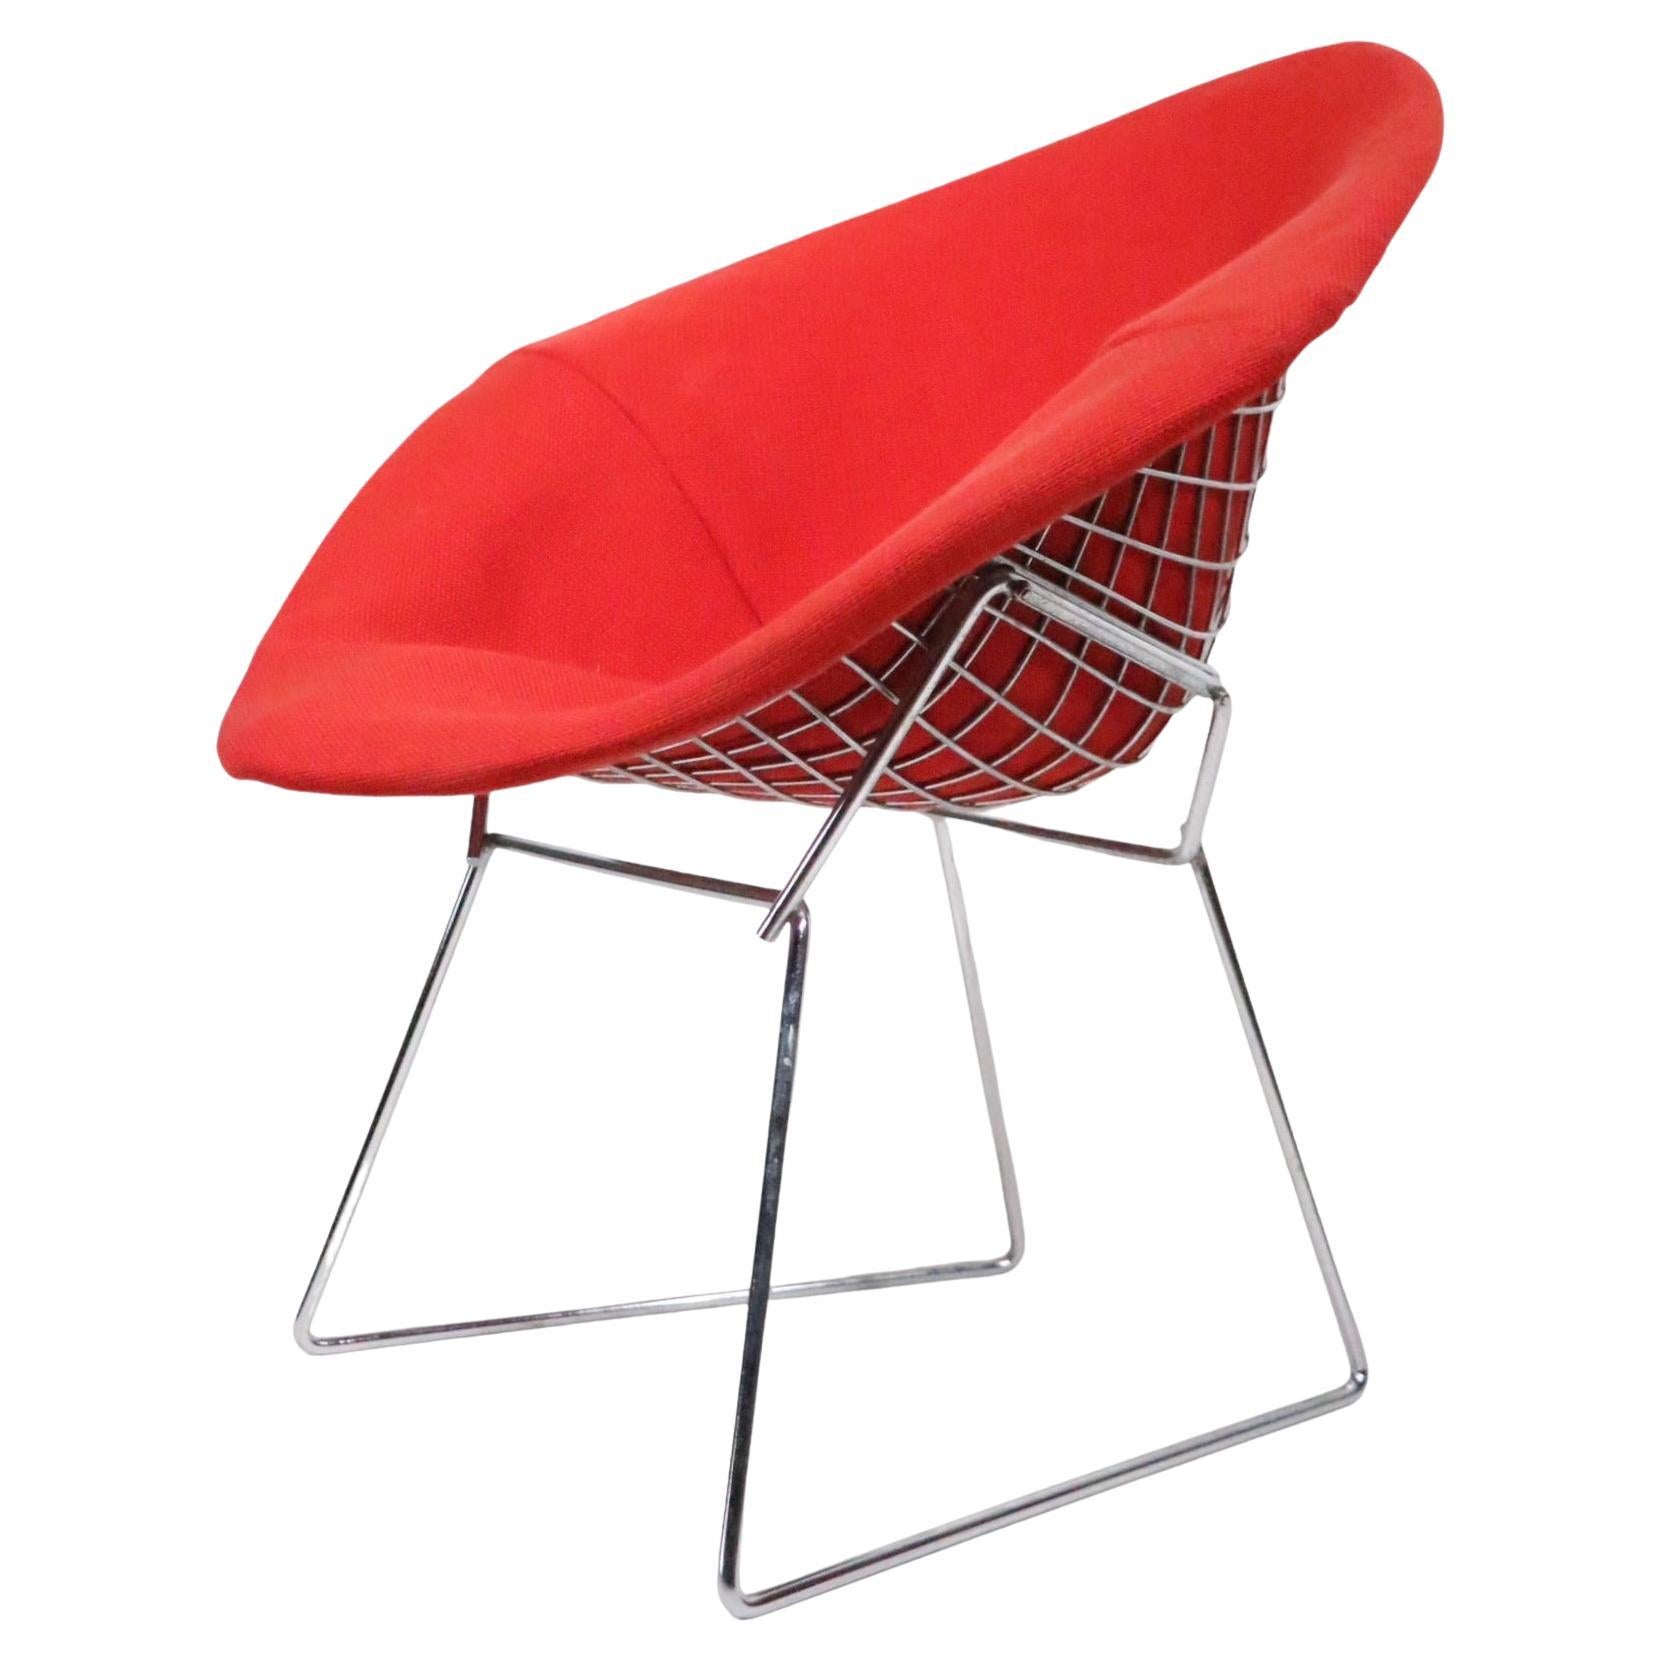 Bertoia for Knoll Chrome Diamond Chair with Full Pad Cover C 1960/1970s For Sale